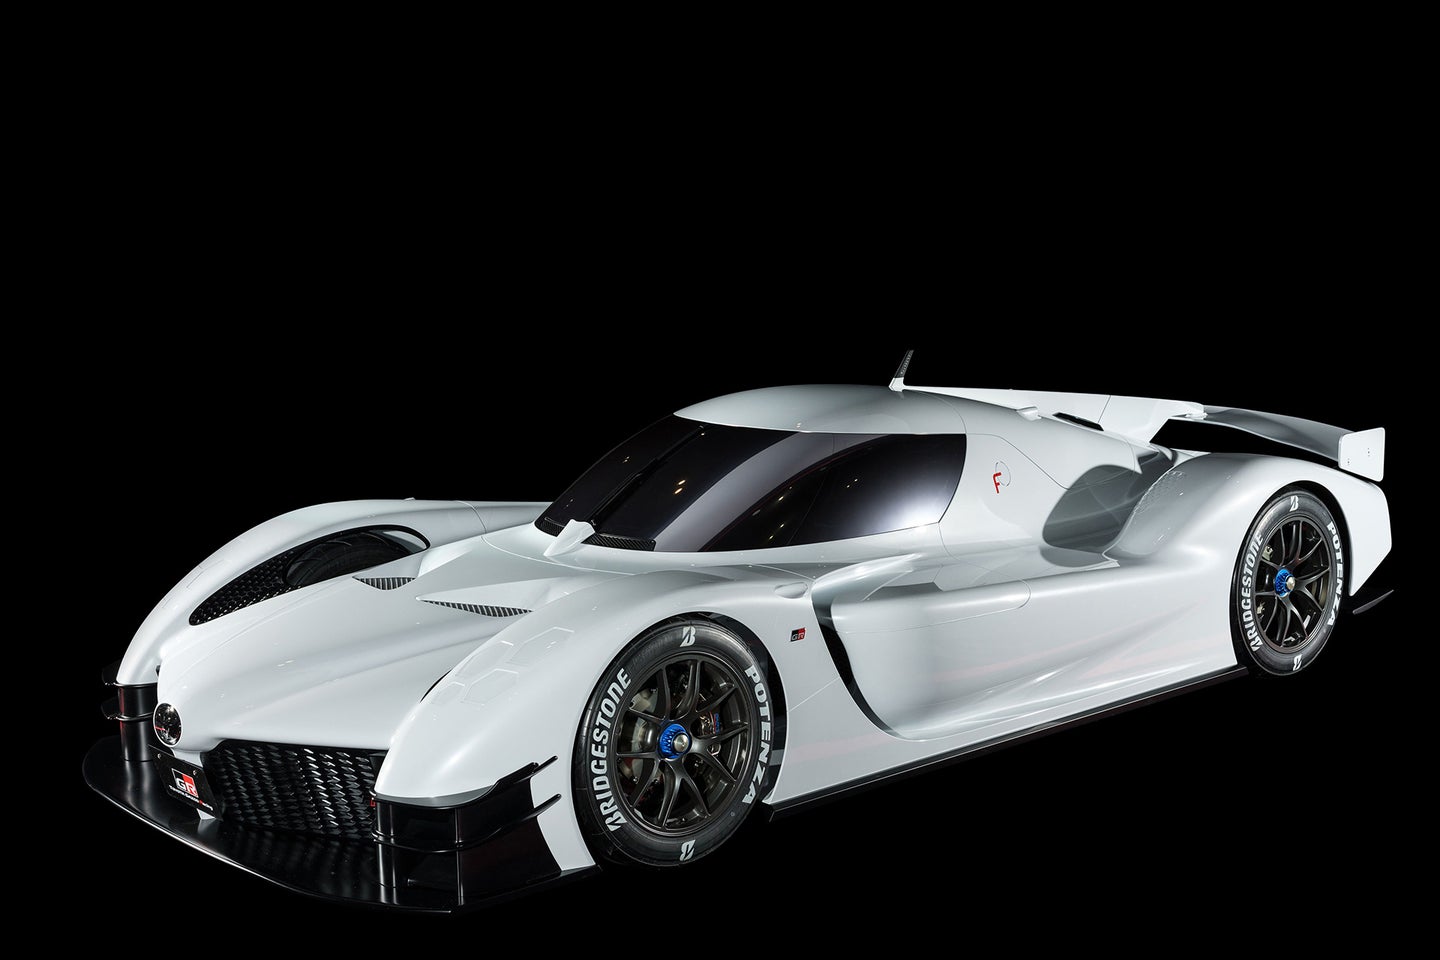 This Is Toyota’s 1,000 Horsepower GR Super Sport Concept